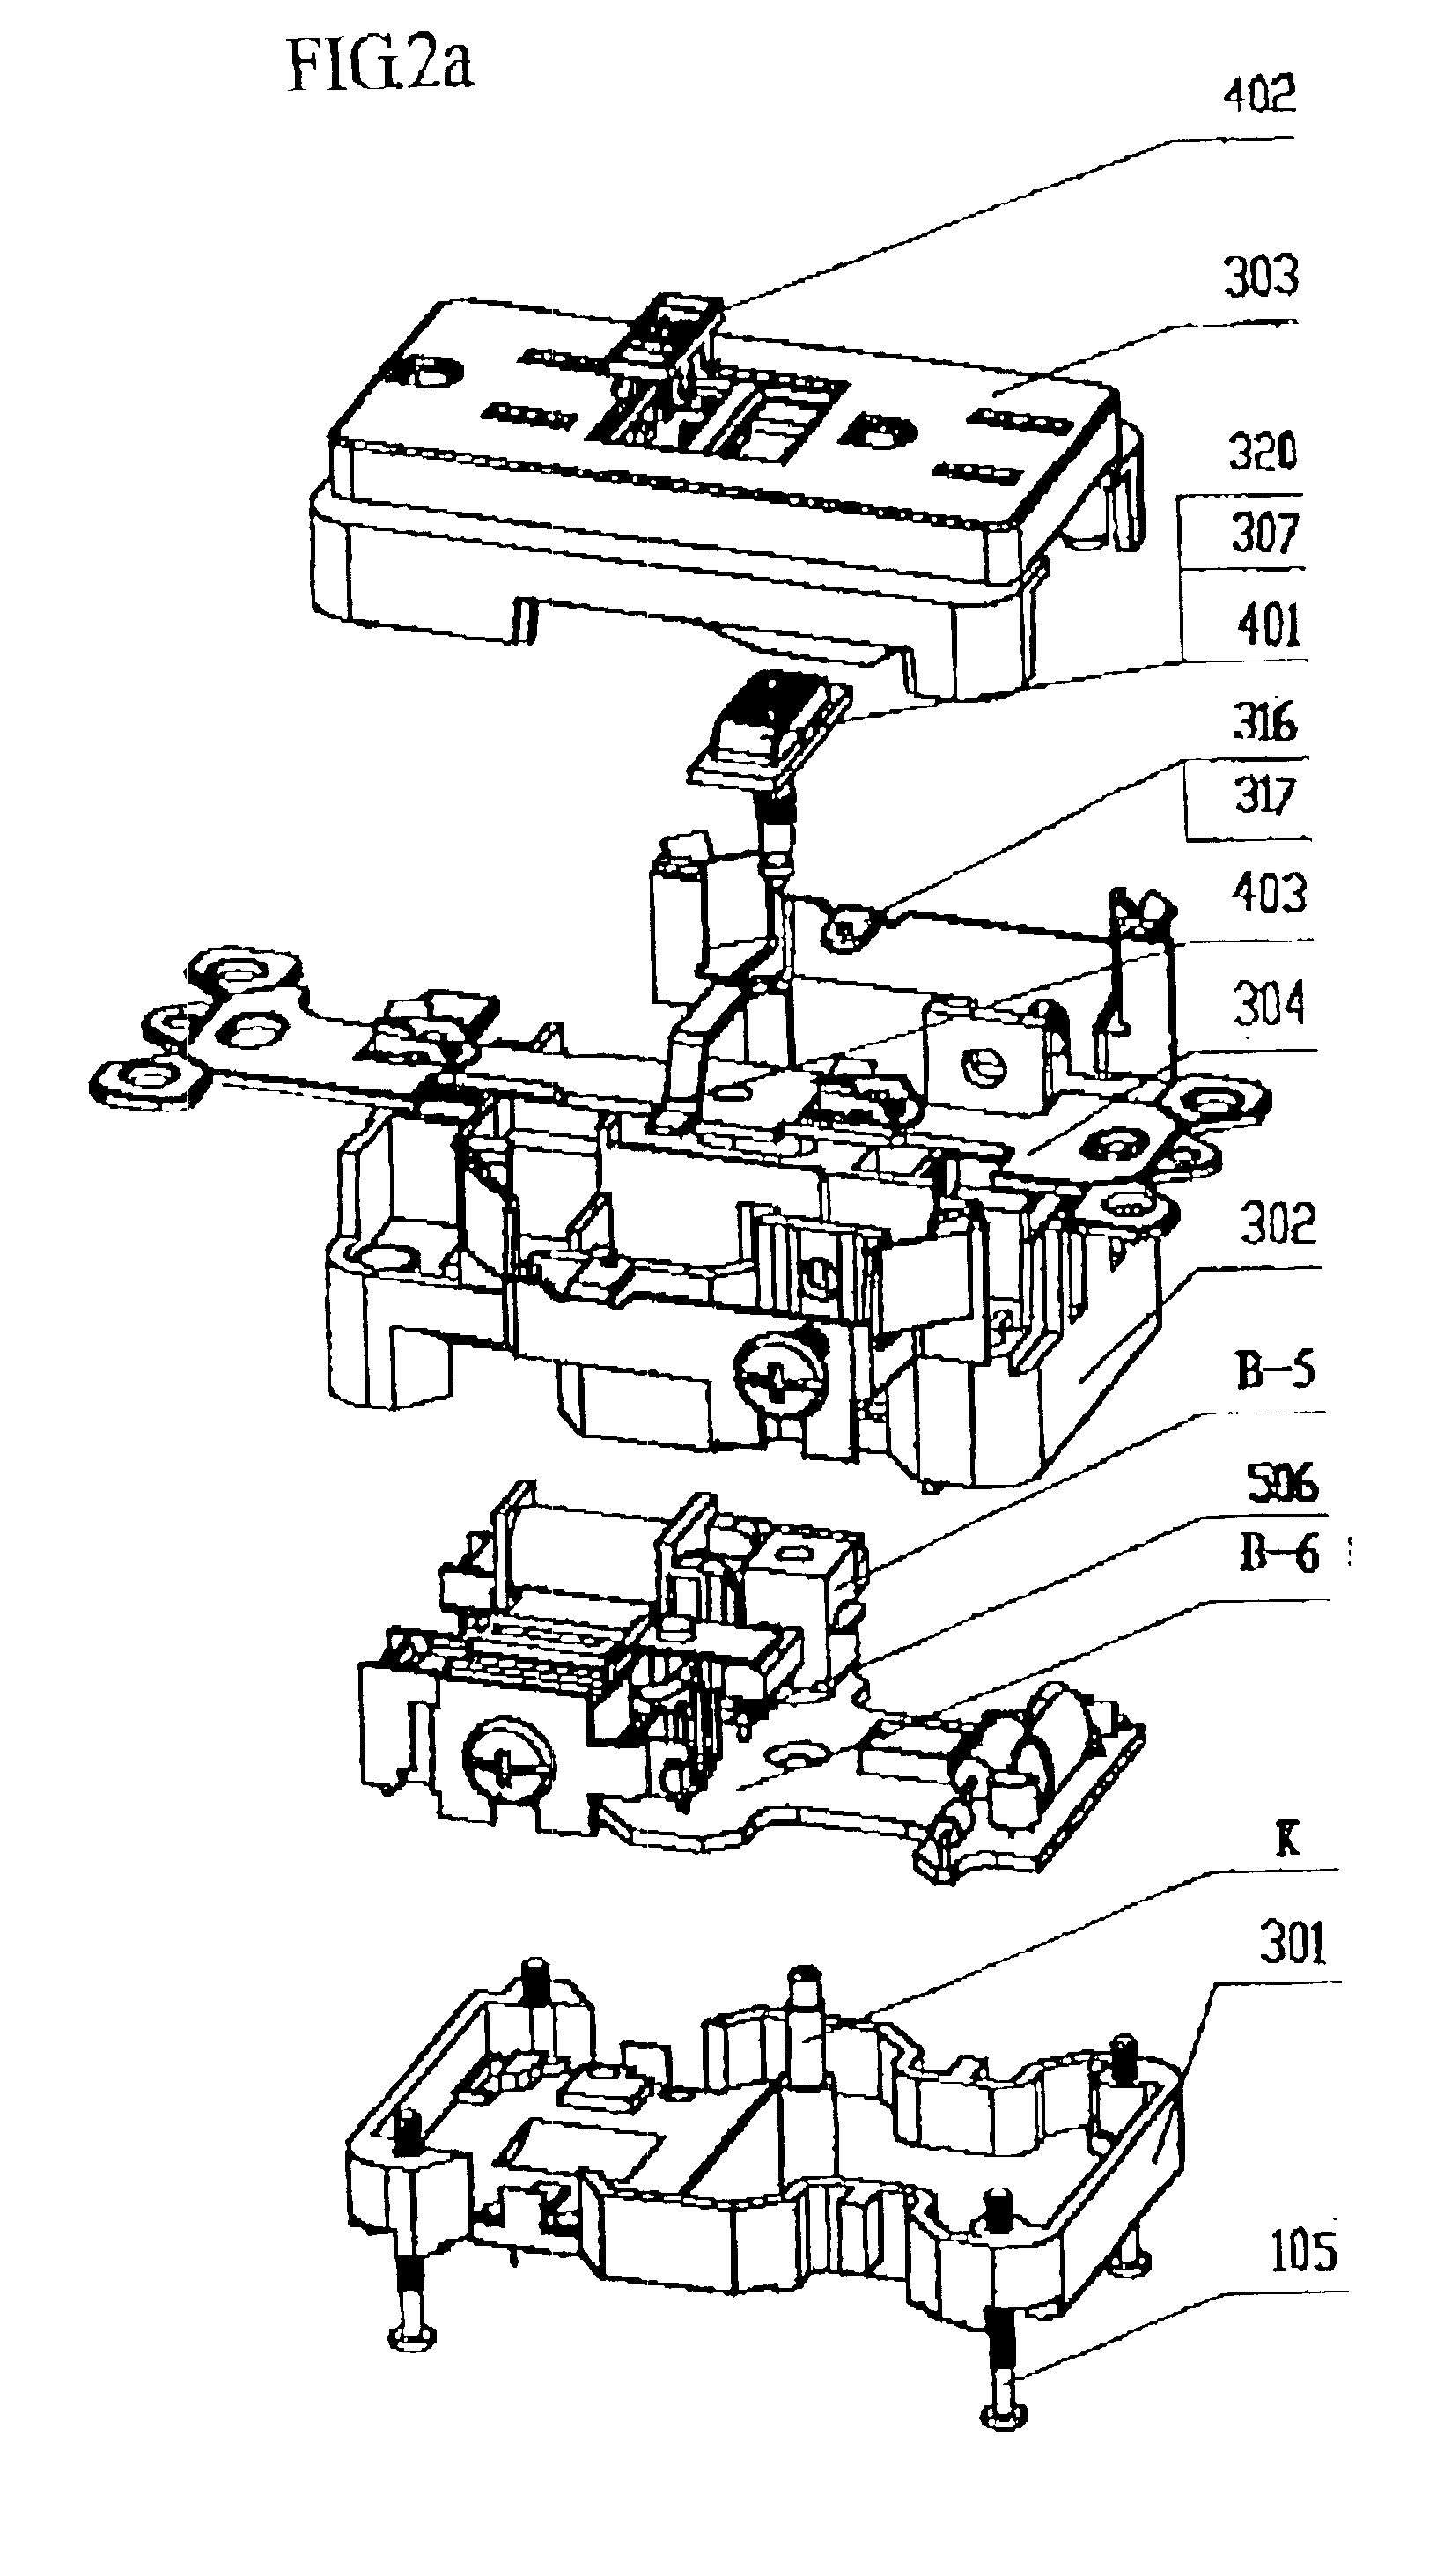 Reverse wiring protection device for ground fault circuit interrupter